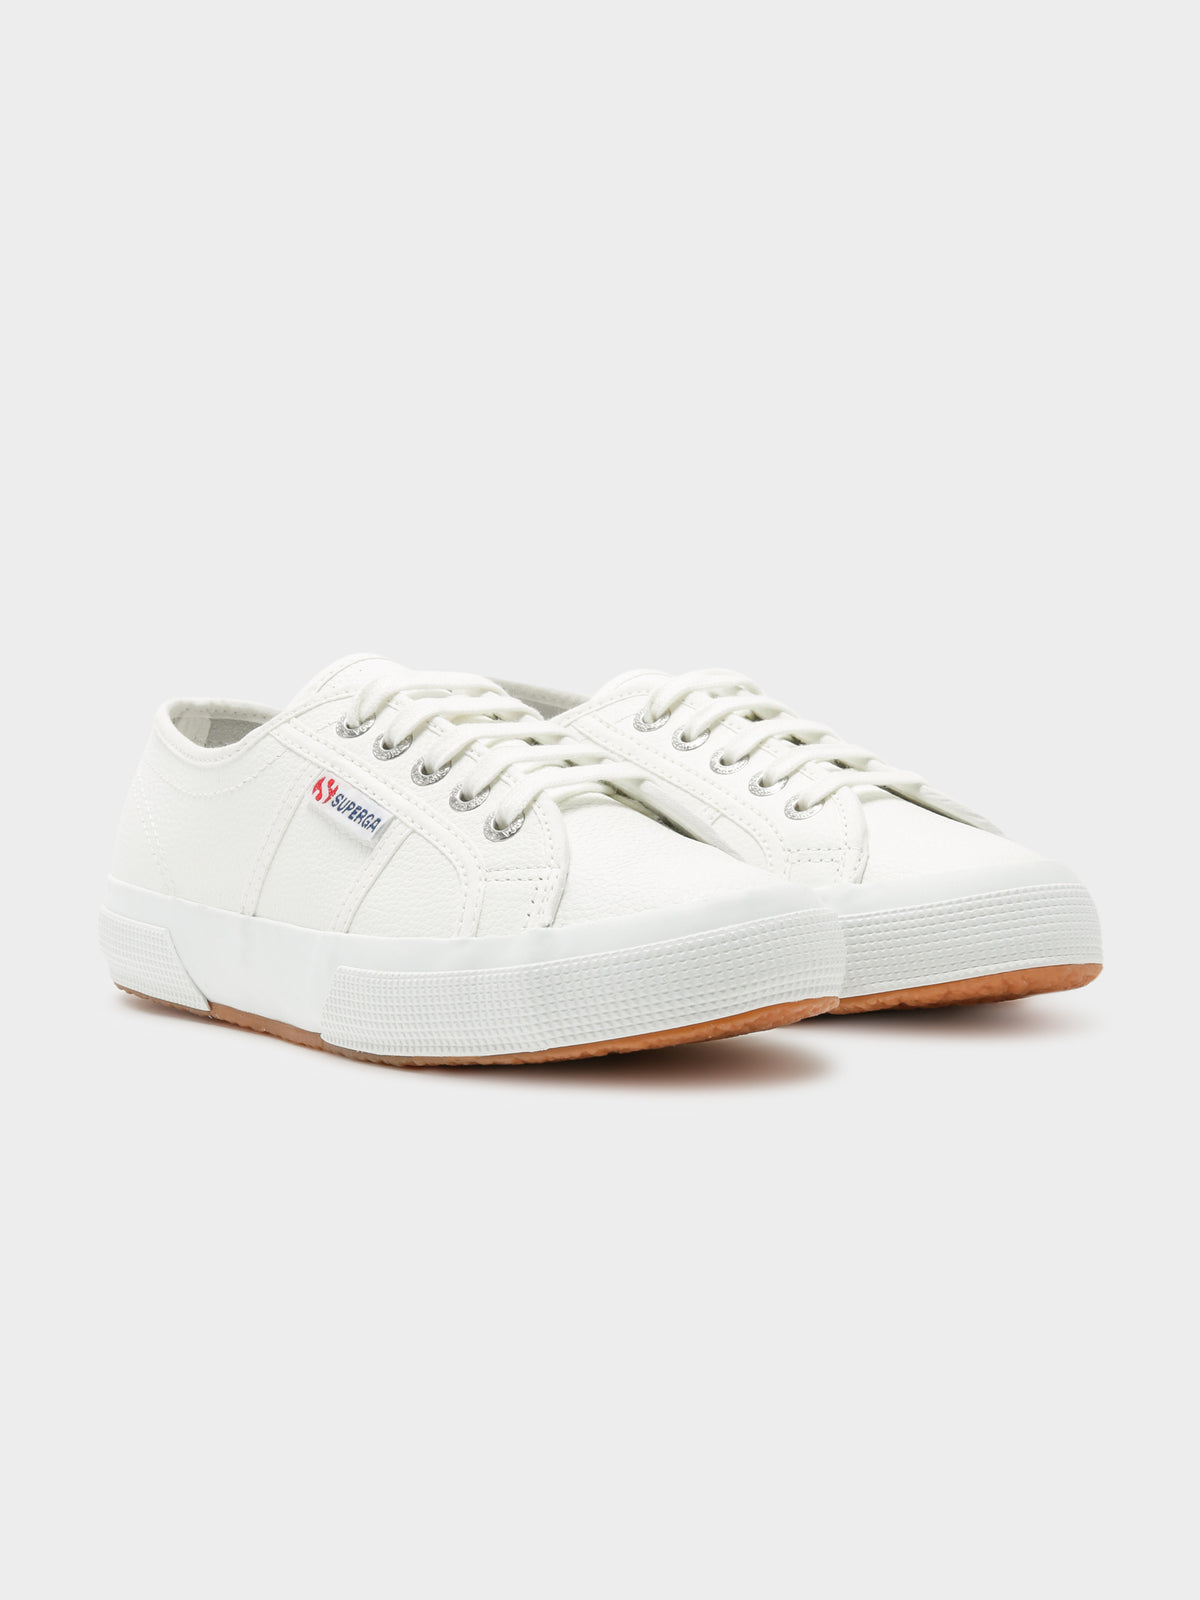 Unisex 2750 Cotu Classic Sneakers in White Leather